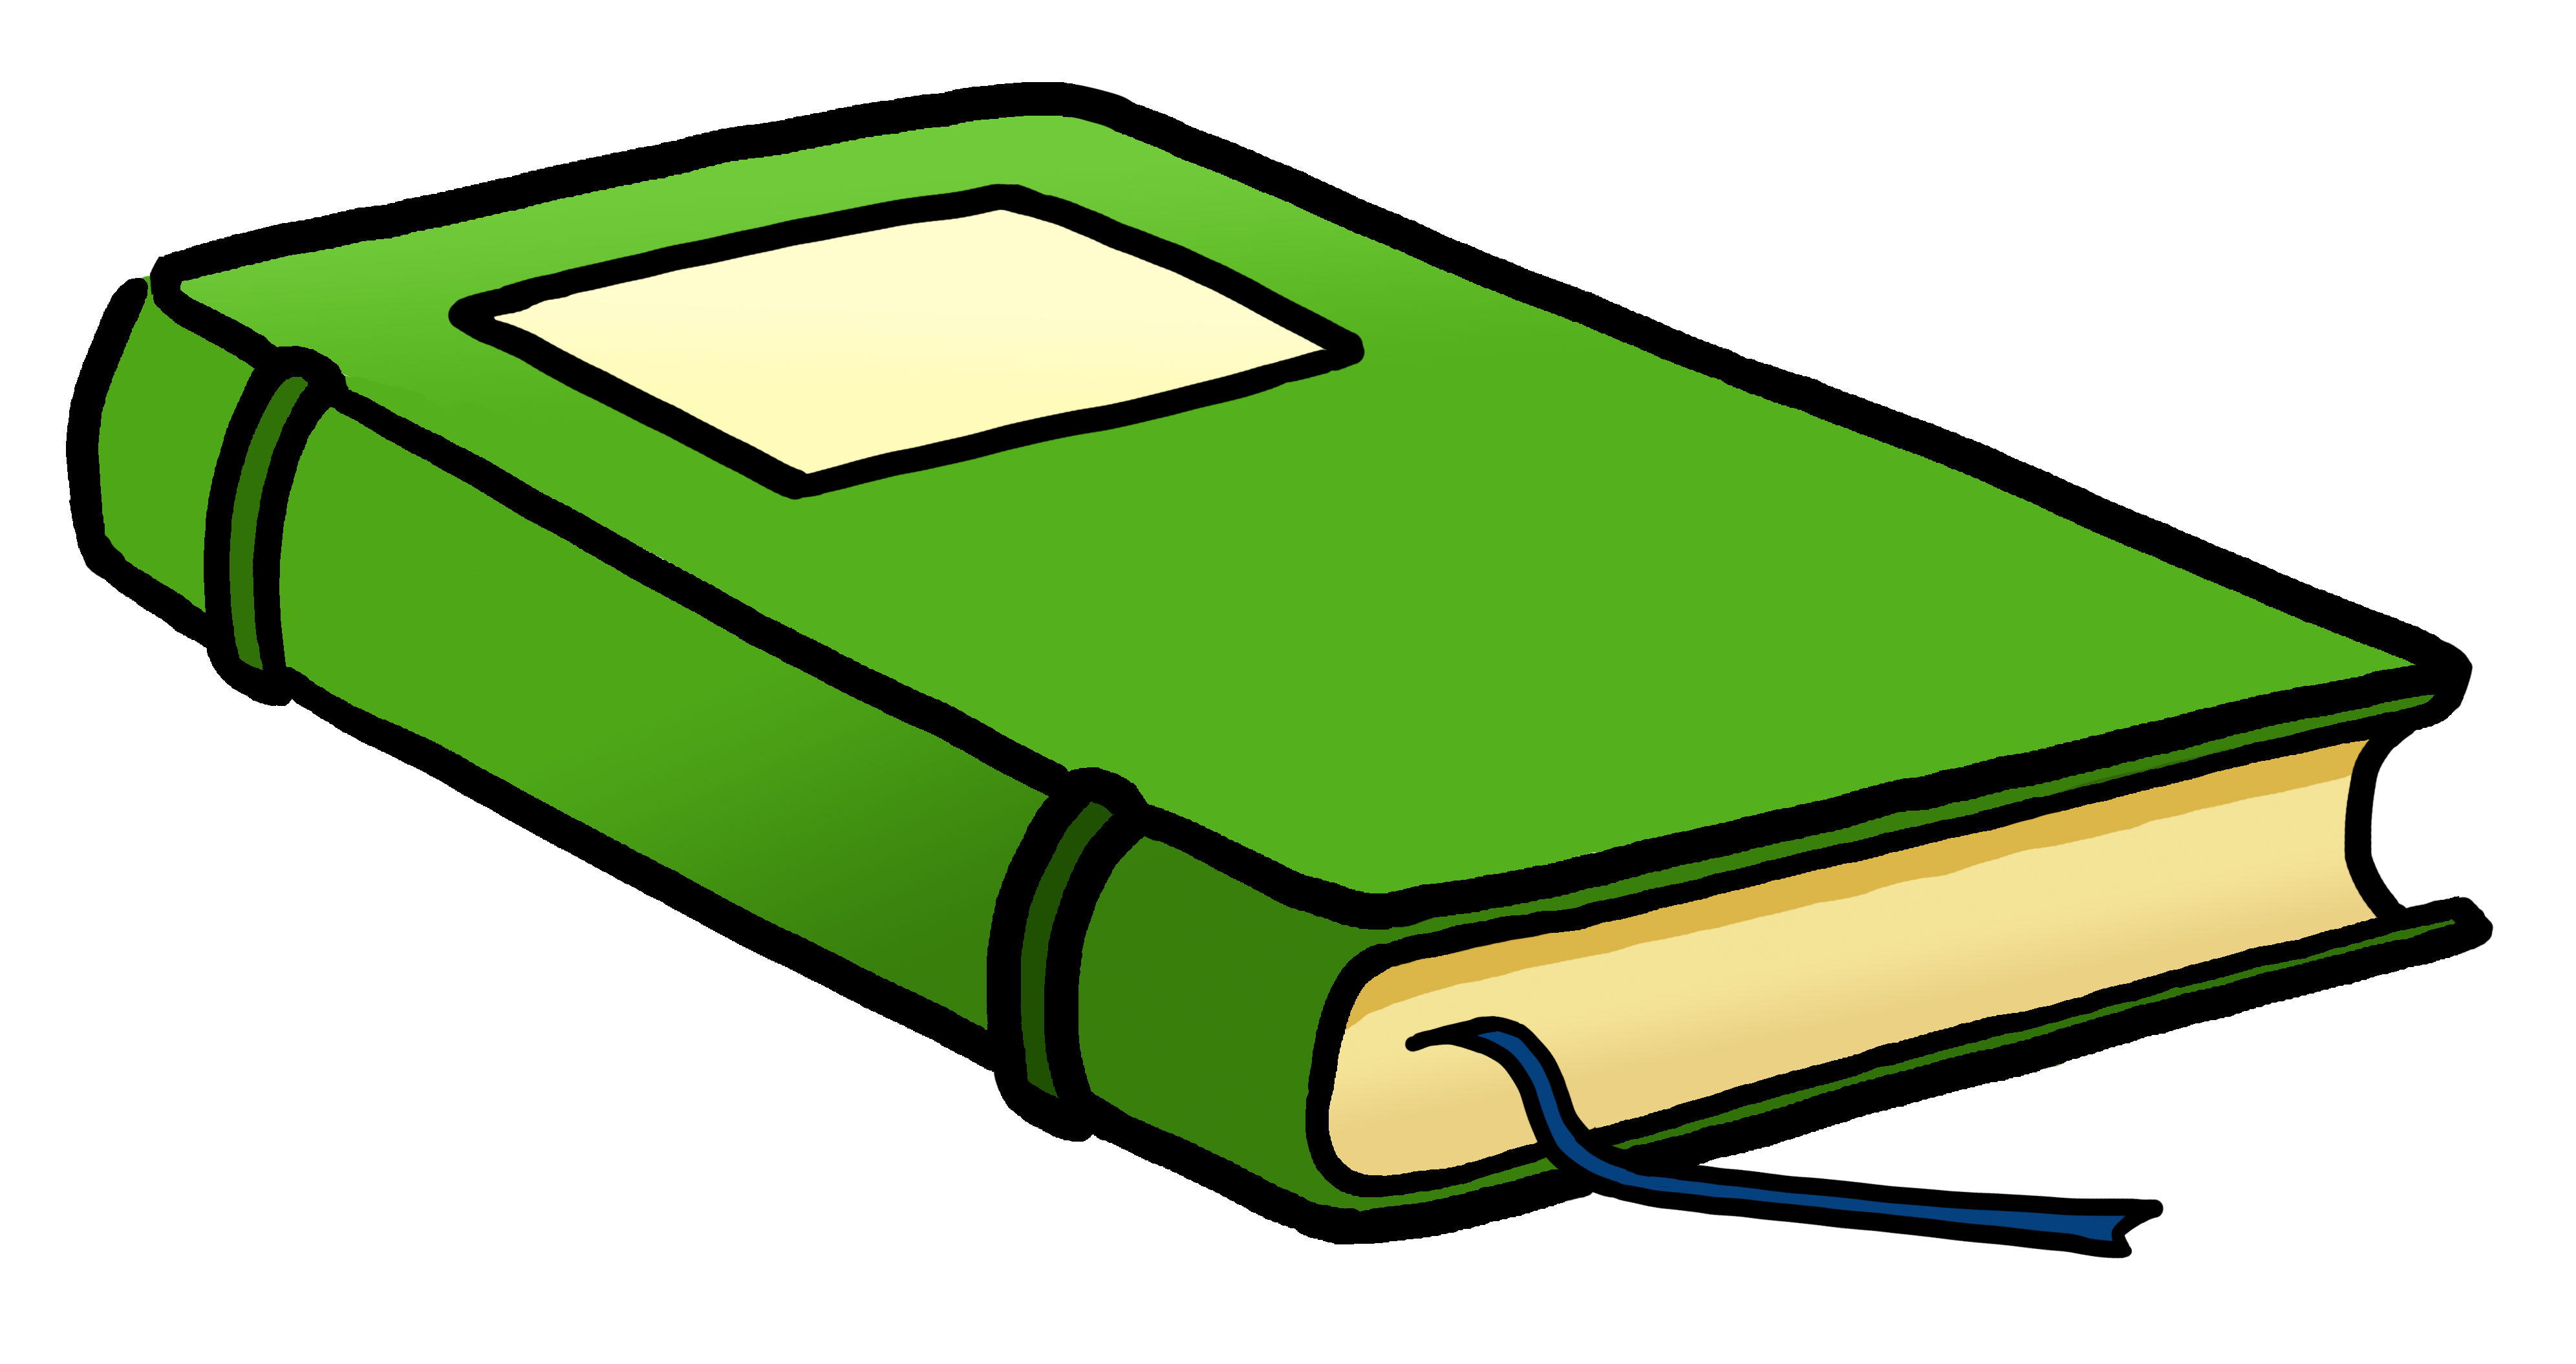 Books Closed Book Images Hd Image Clipart